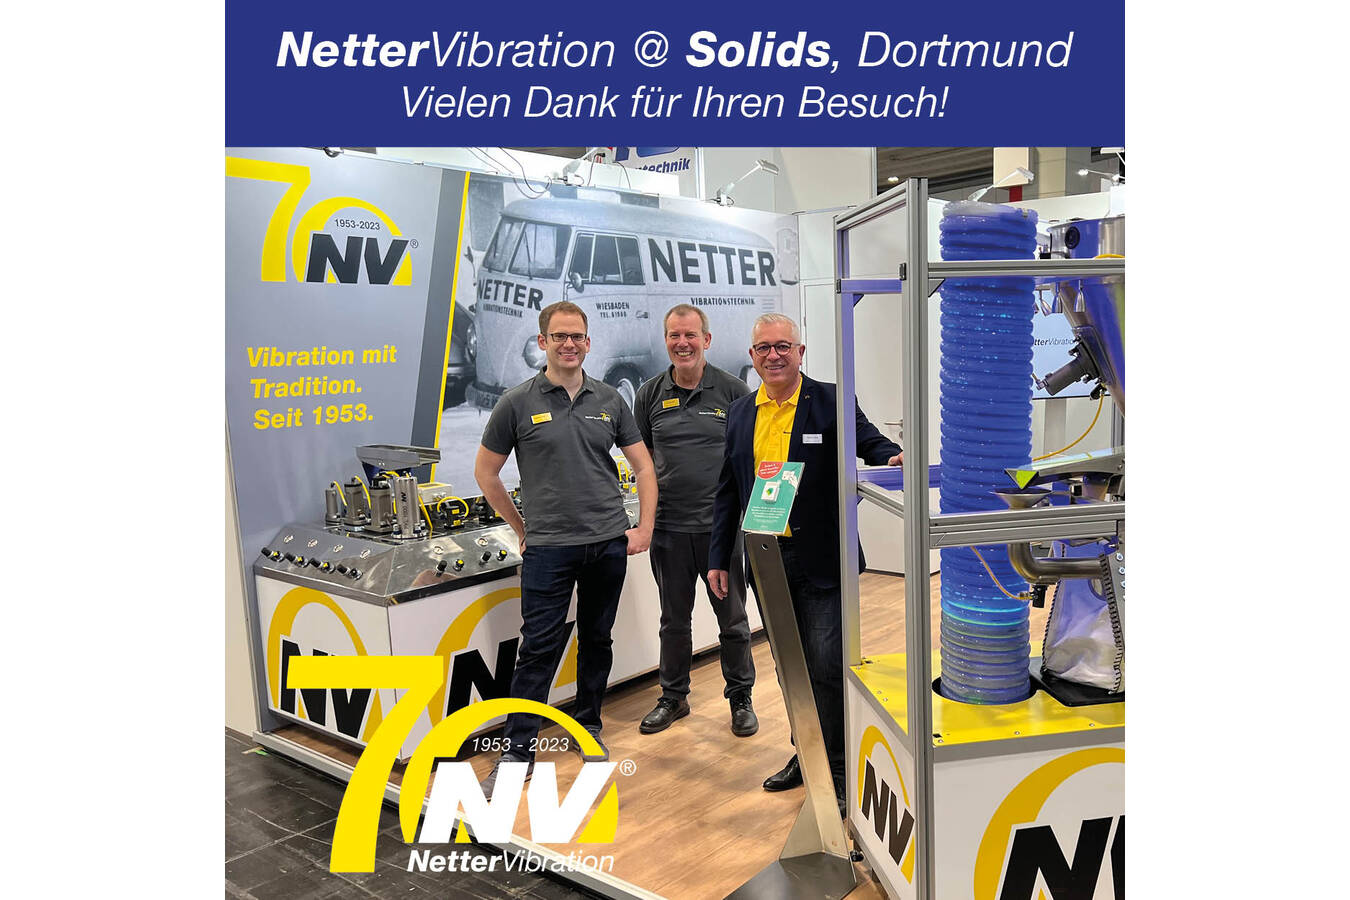 NetterVibration starts its anniversary year at SOLIDS 2023 